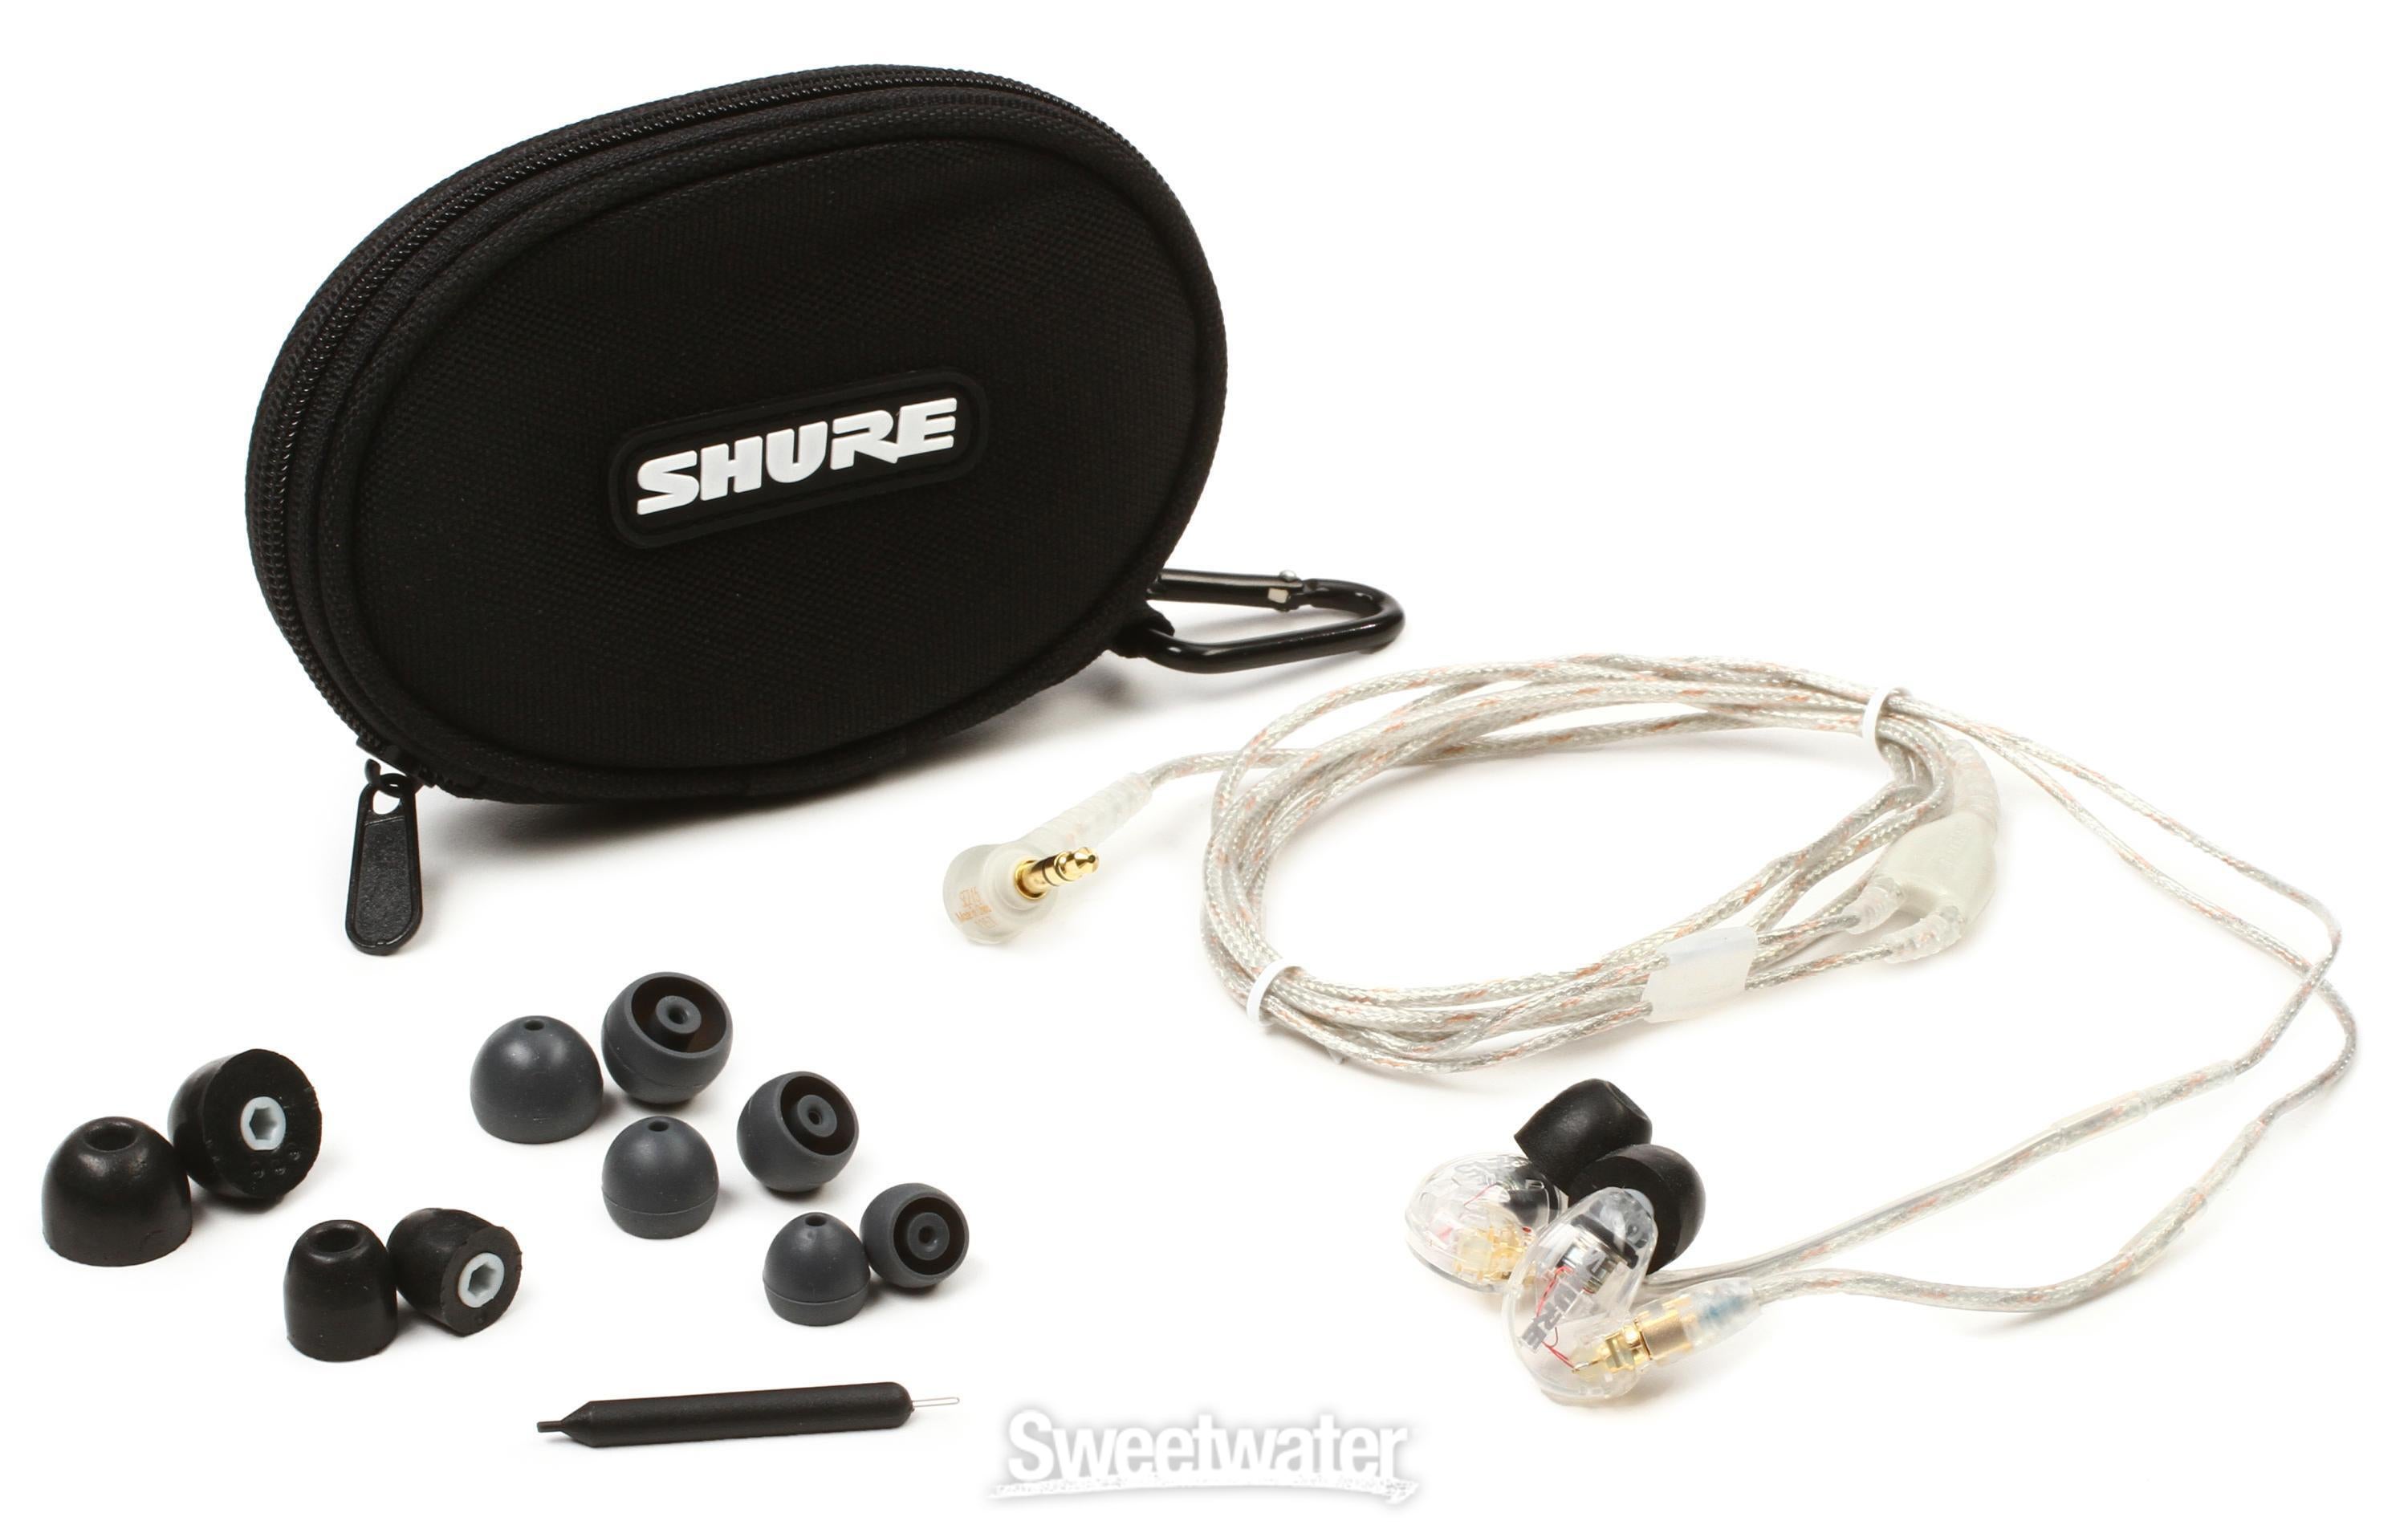 Shure SE215-CL Sound-isolating Earphones - Clear